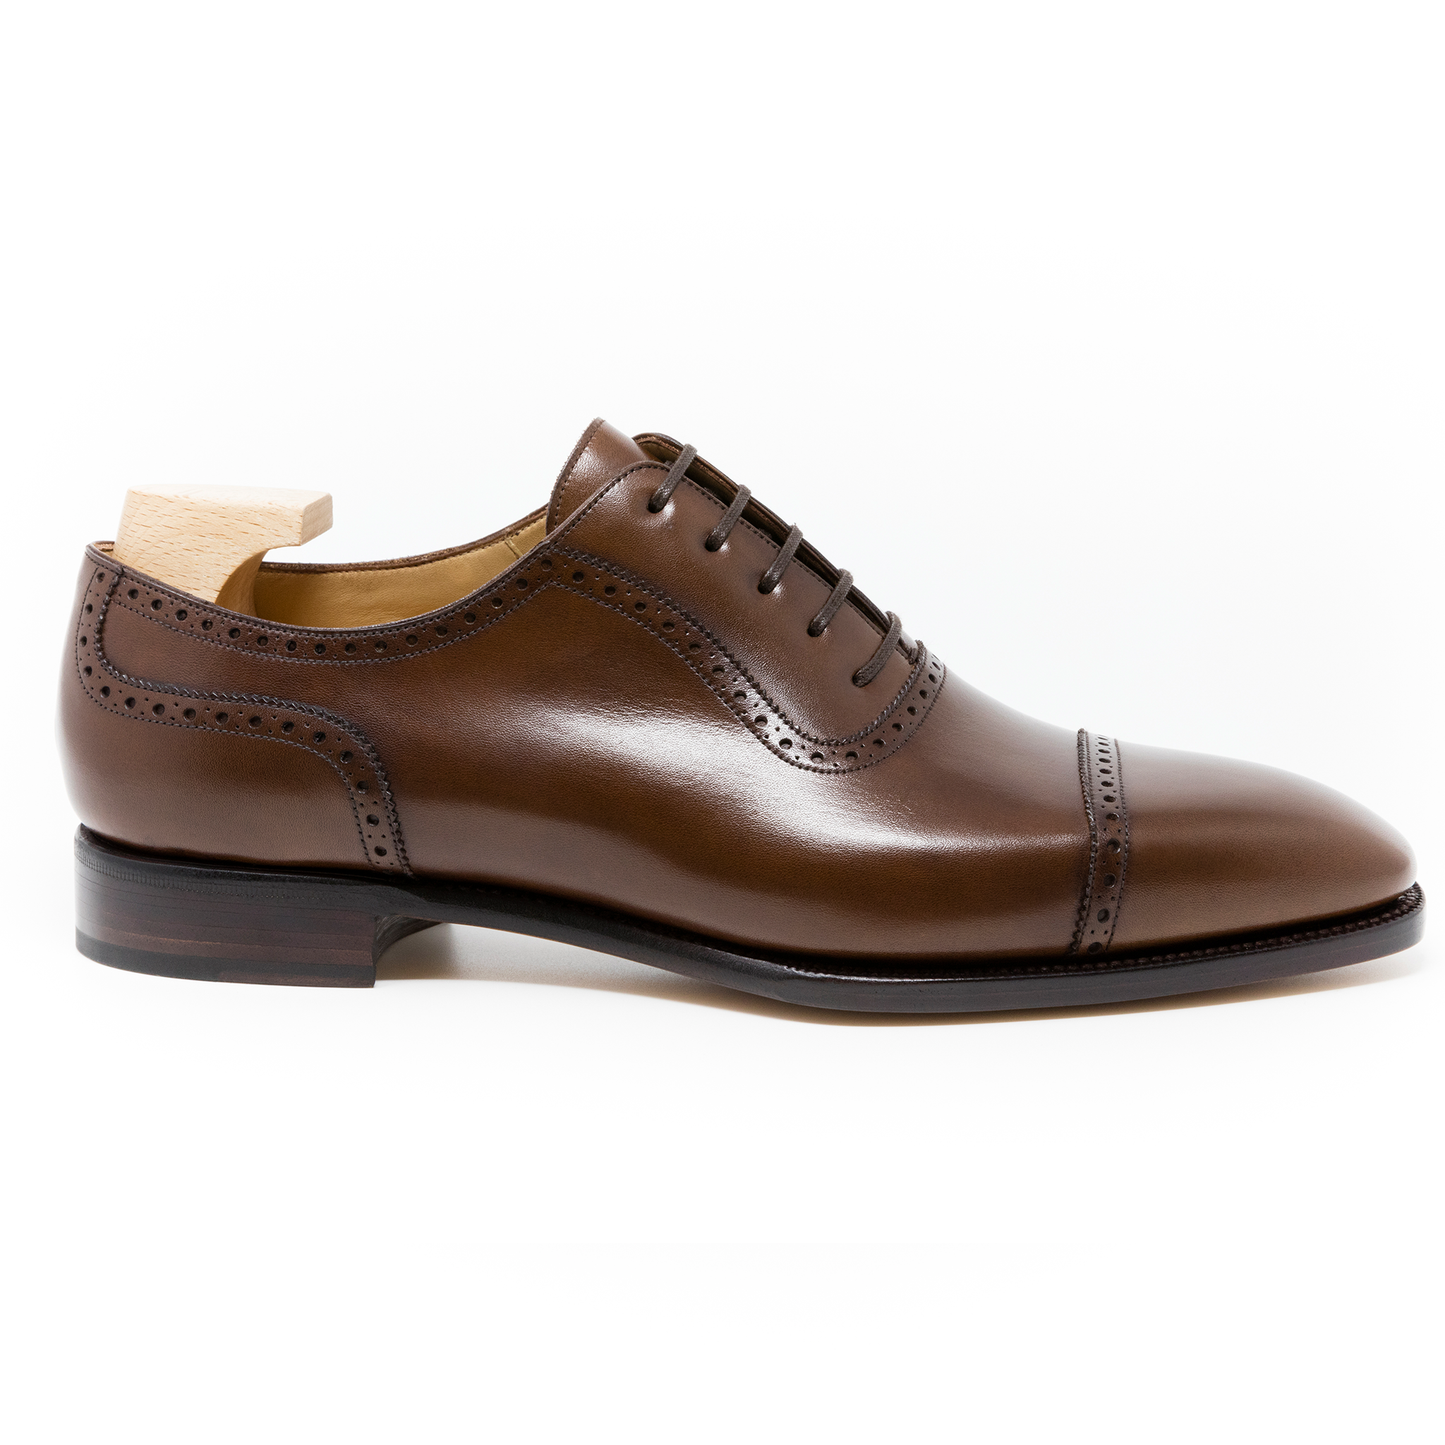 TLB Mallorca leather shoes 121 / PICASSO / VEGANO BROWN